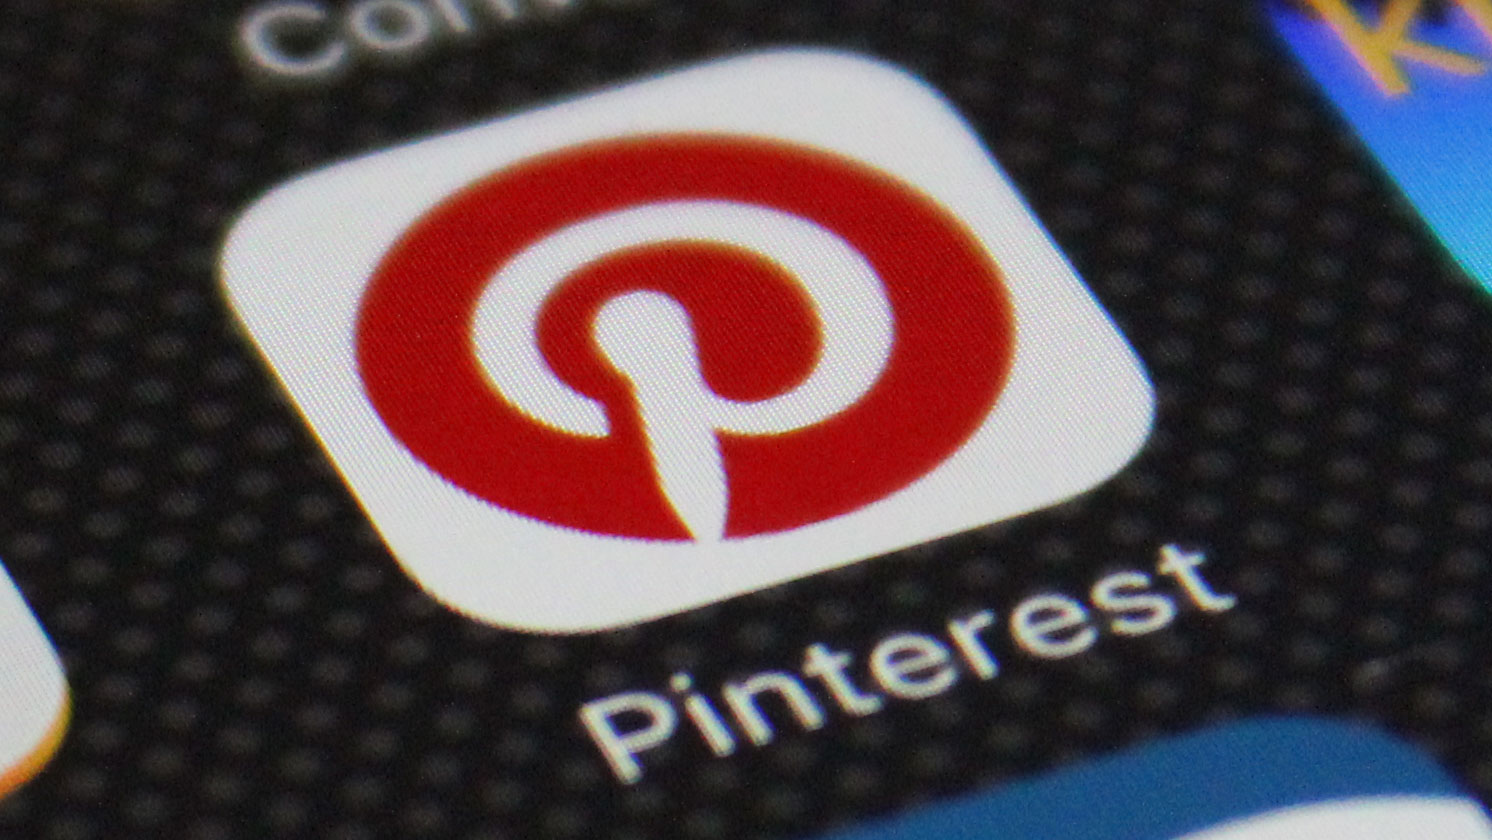 15 Pinterest tips for the shiny new redesign - CNET